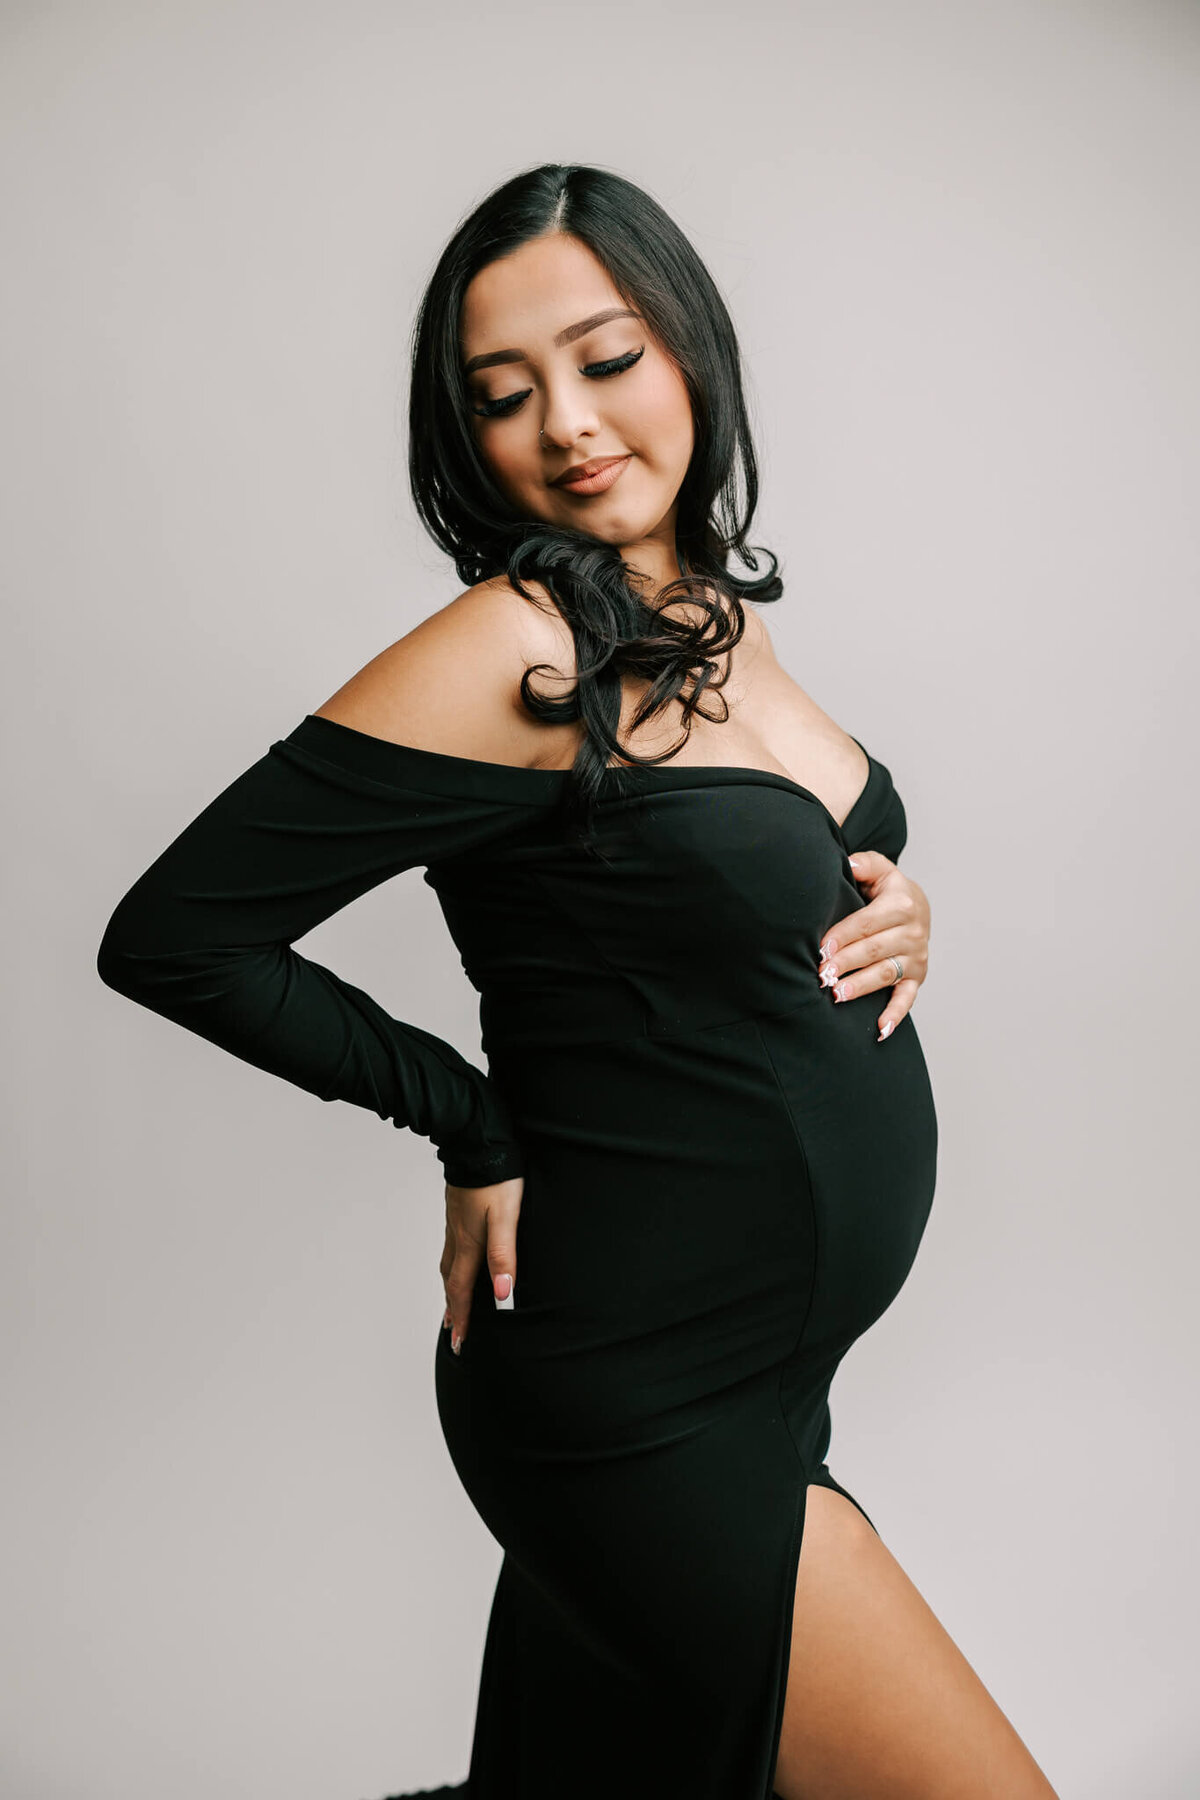 fine art maternity phtography by Ann Marshall featuring mom wearing a black dress and looking over her shoulder